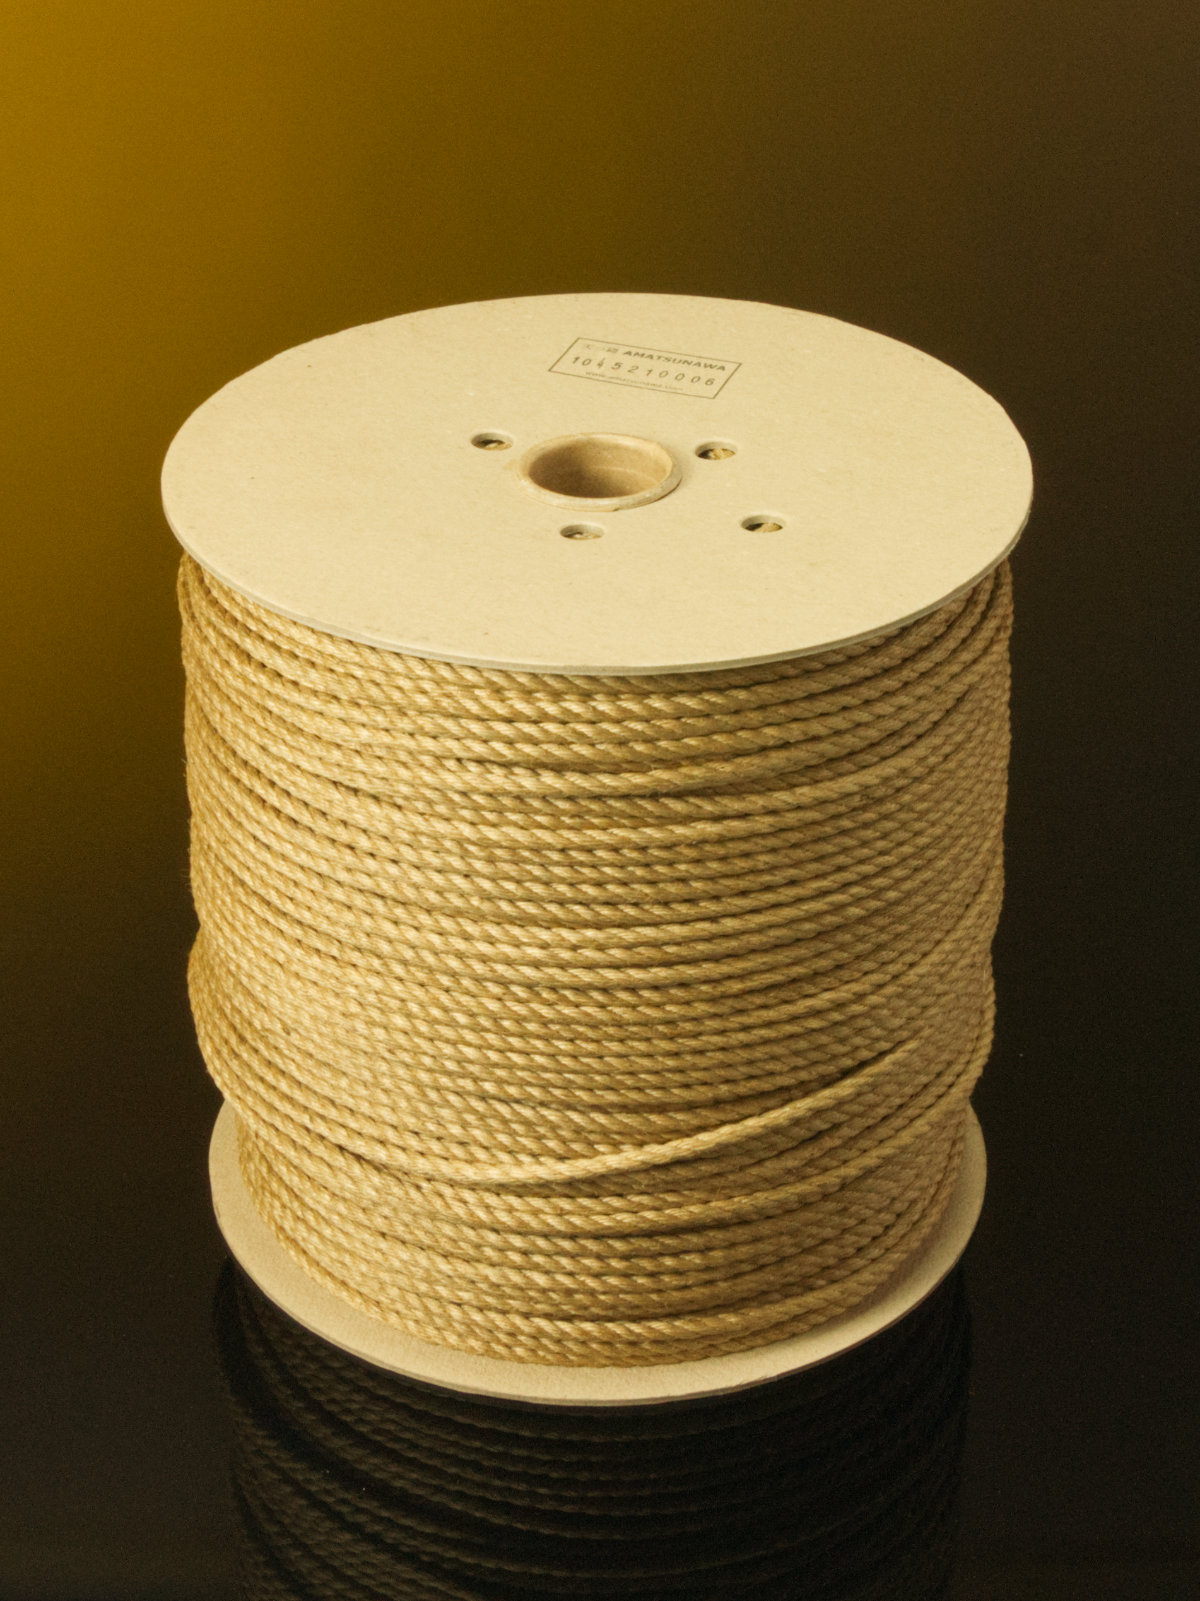 5mm Jute Twine, 50m Braided Jute Rope, Natural Twine String for